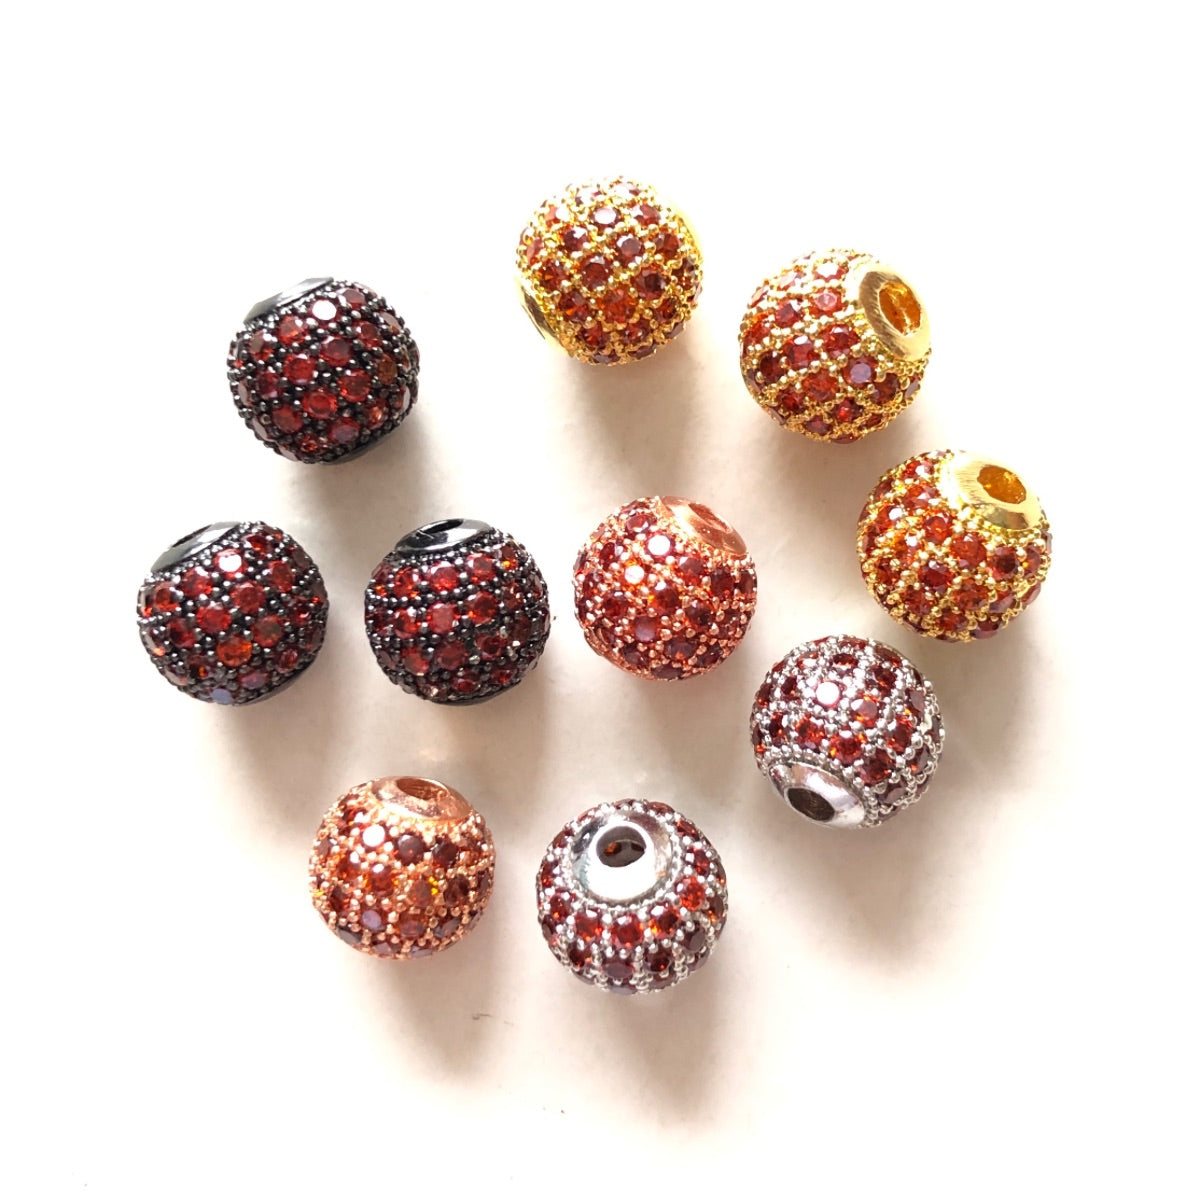 10pcs/lot 6mm, 8mm Colorful CZ Paved Ball Spacers Mix Colors Reddish Orange CZ Paved Spacers 6mm Beads 8mm Beads Ball Beads Colorful Zirconia New Spacers Arrivals Charms Beads Beyond